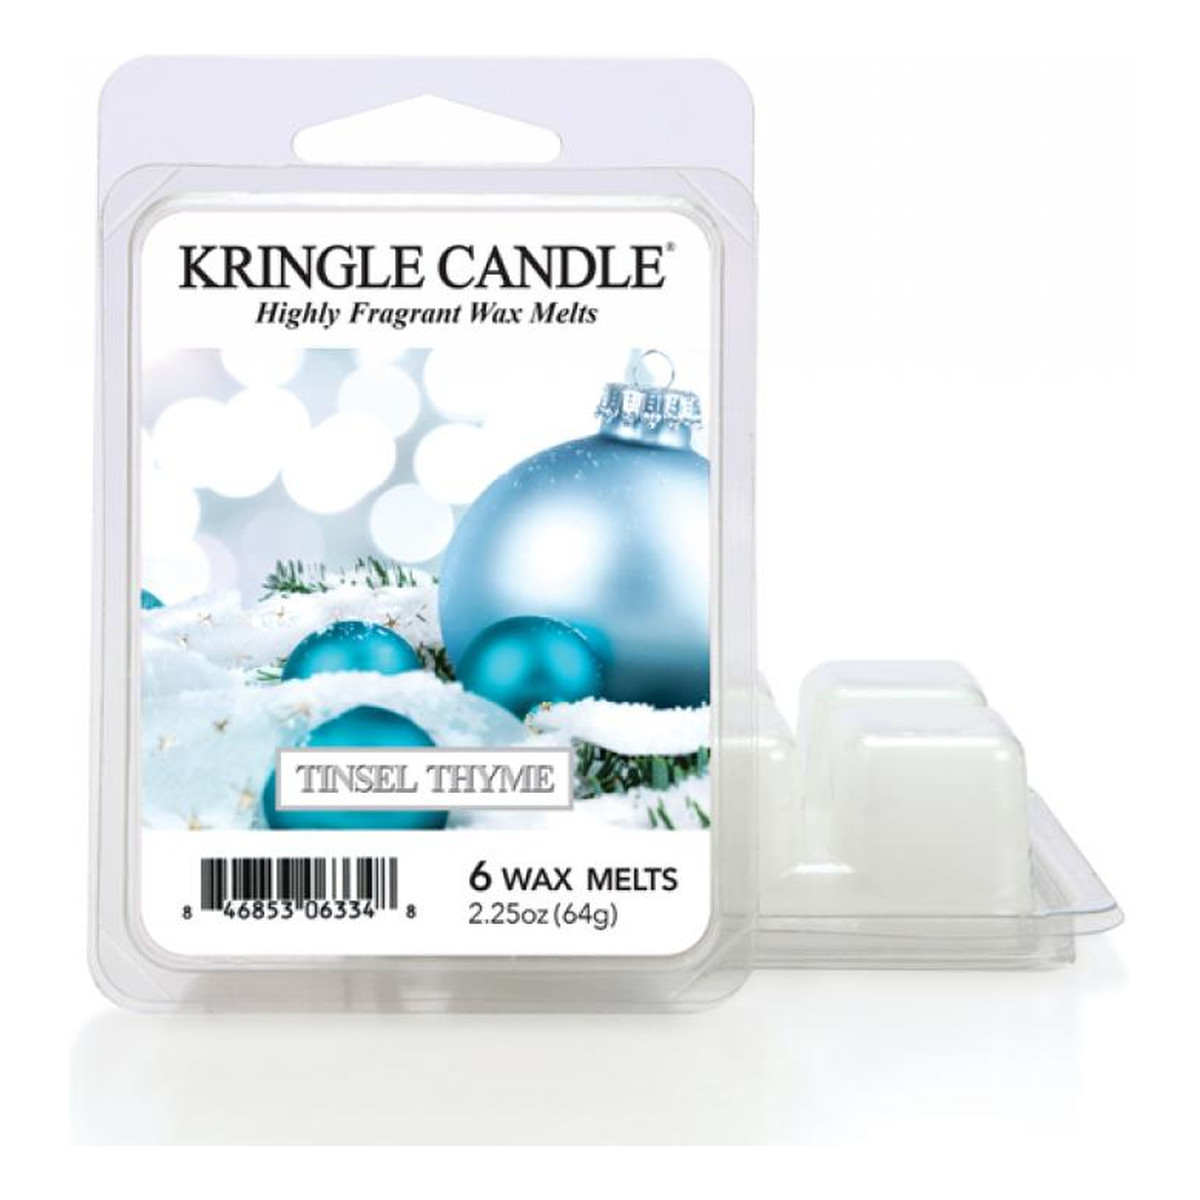 Kringle Candle Wax wosk zapachowy "potpourri" tinsel thyme 64g